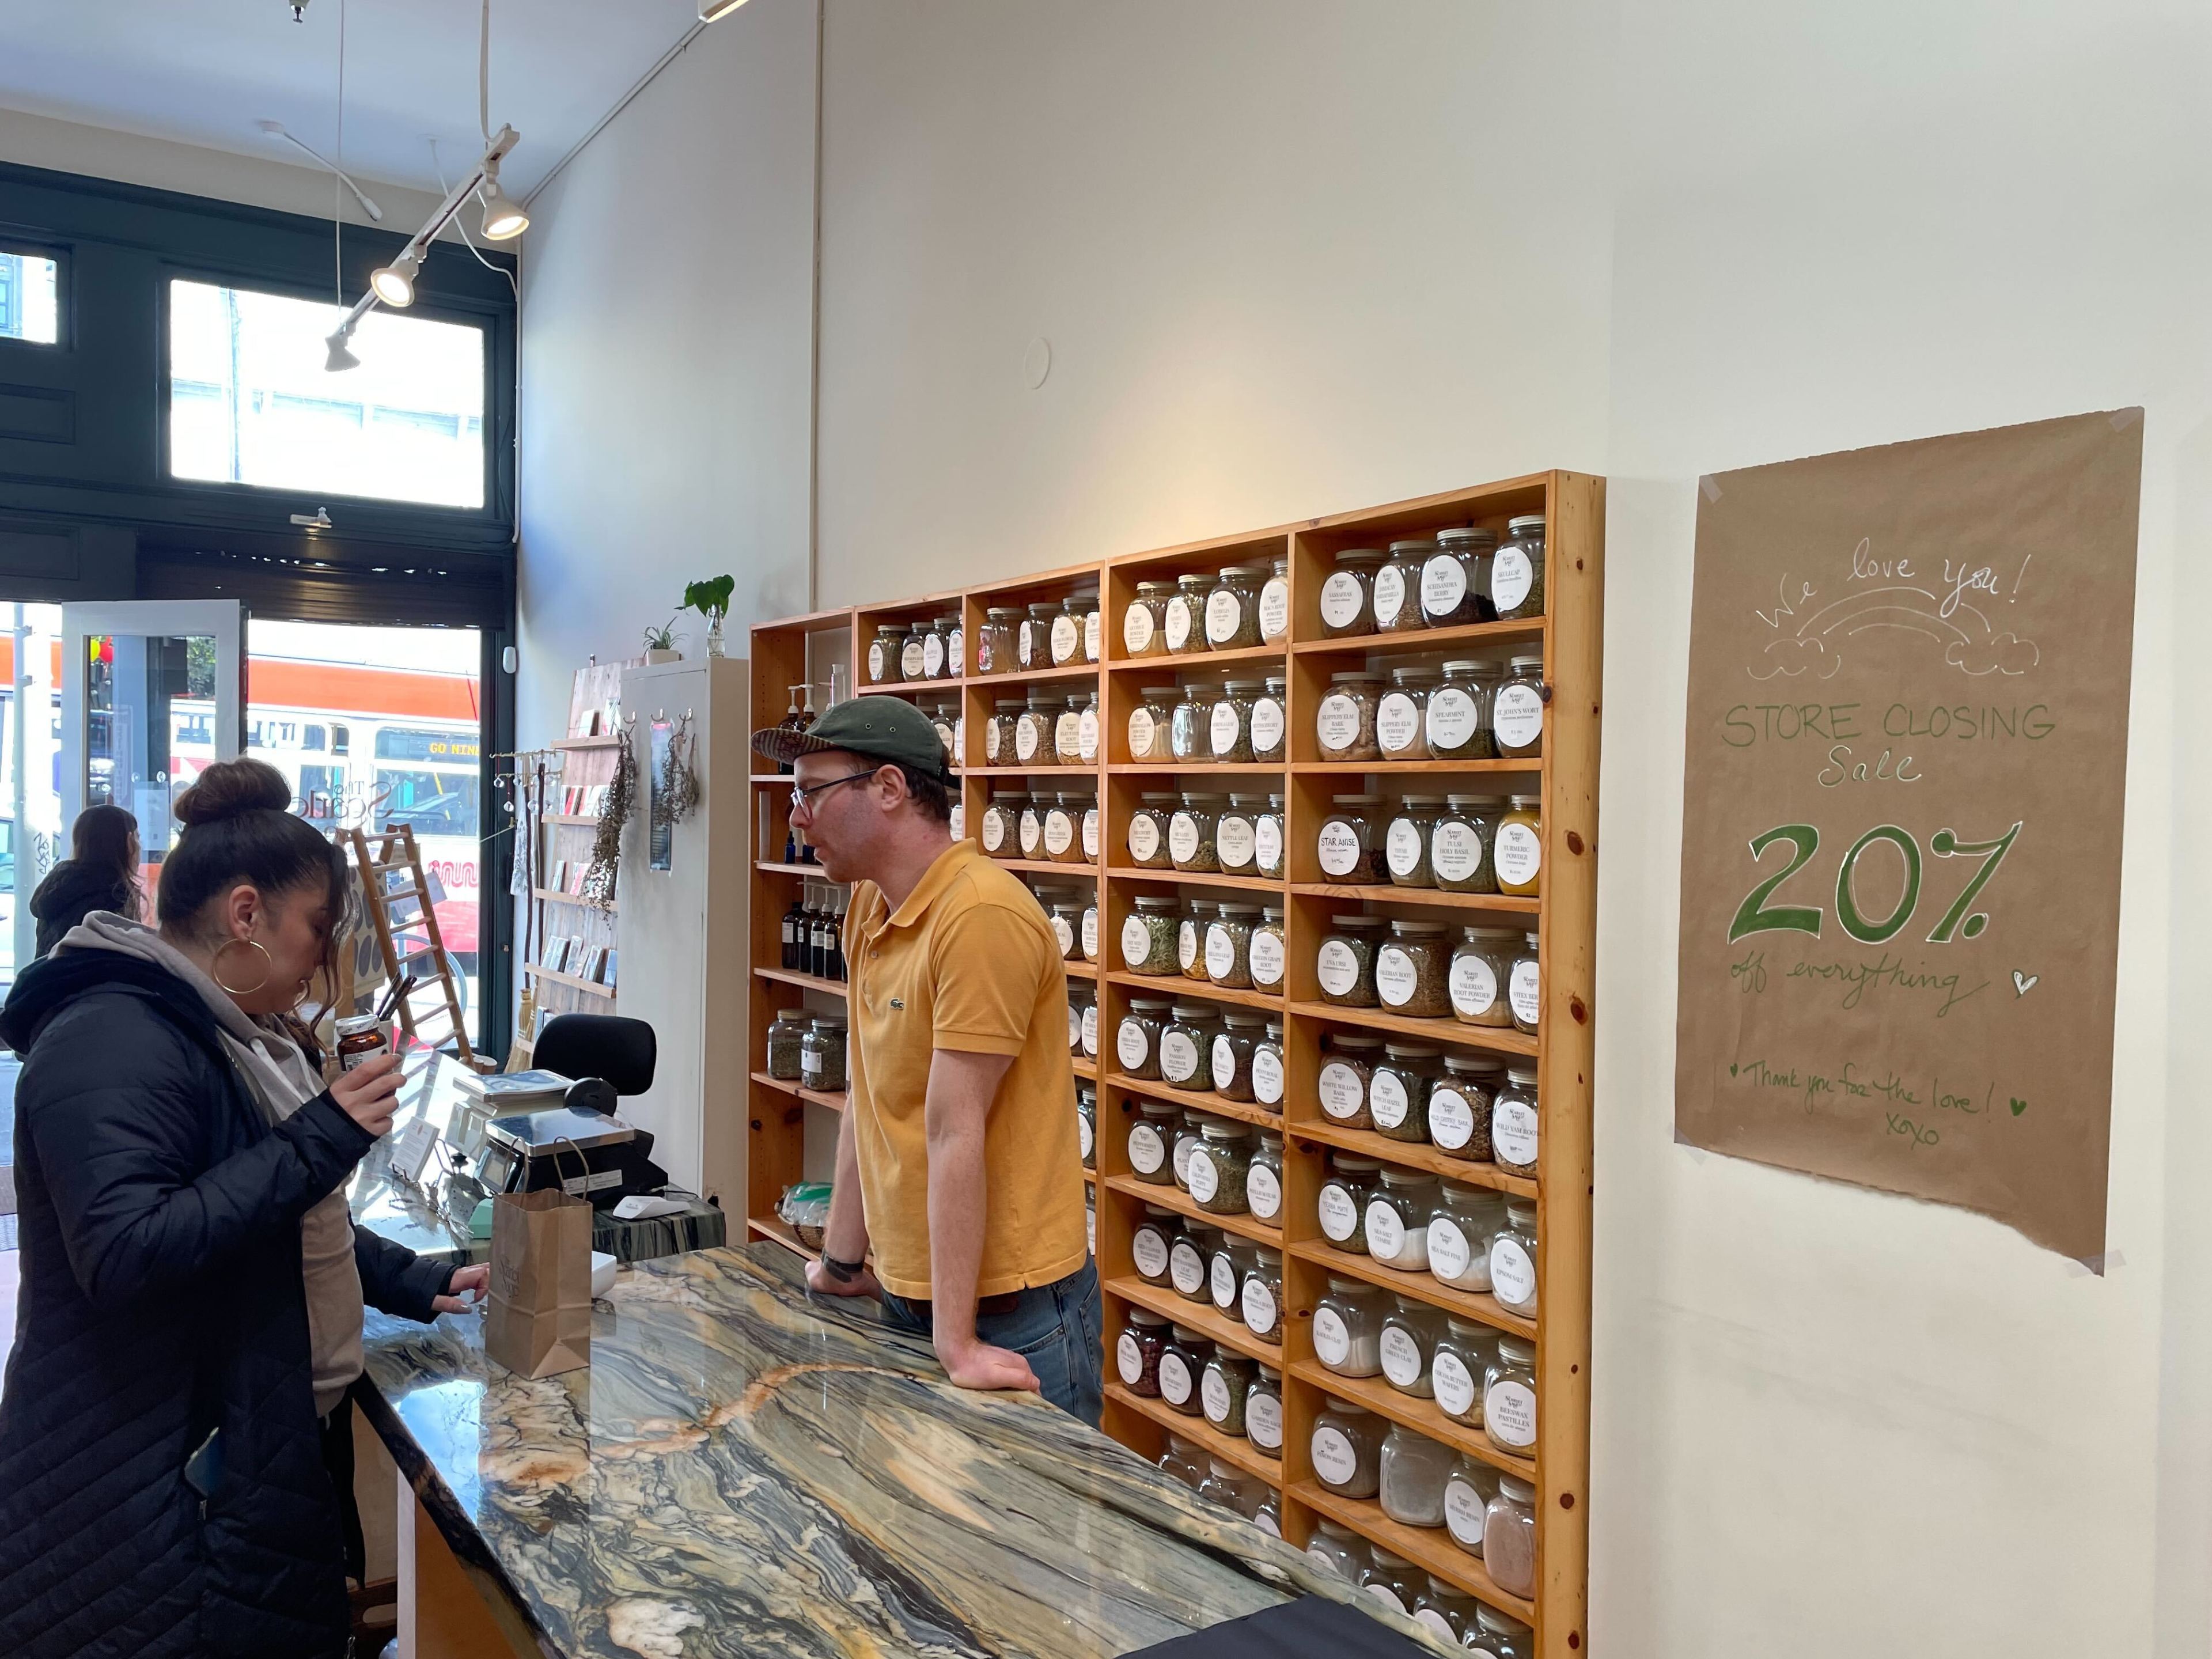 A shelf full of dried tea leaves is shown on sale for 20% off as a staff member and a customer stand nearby,